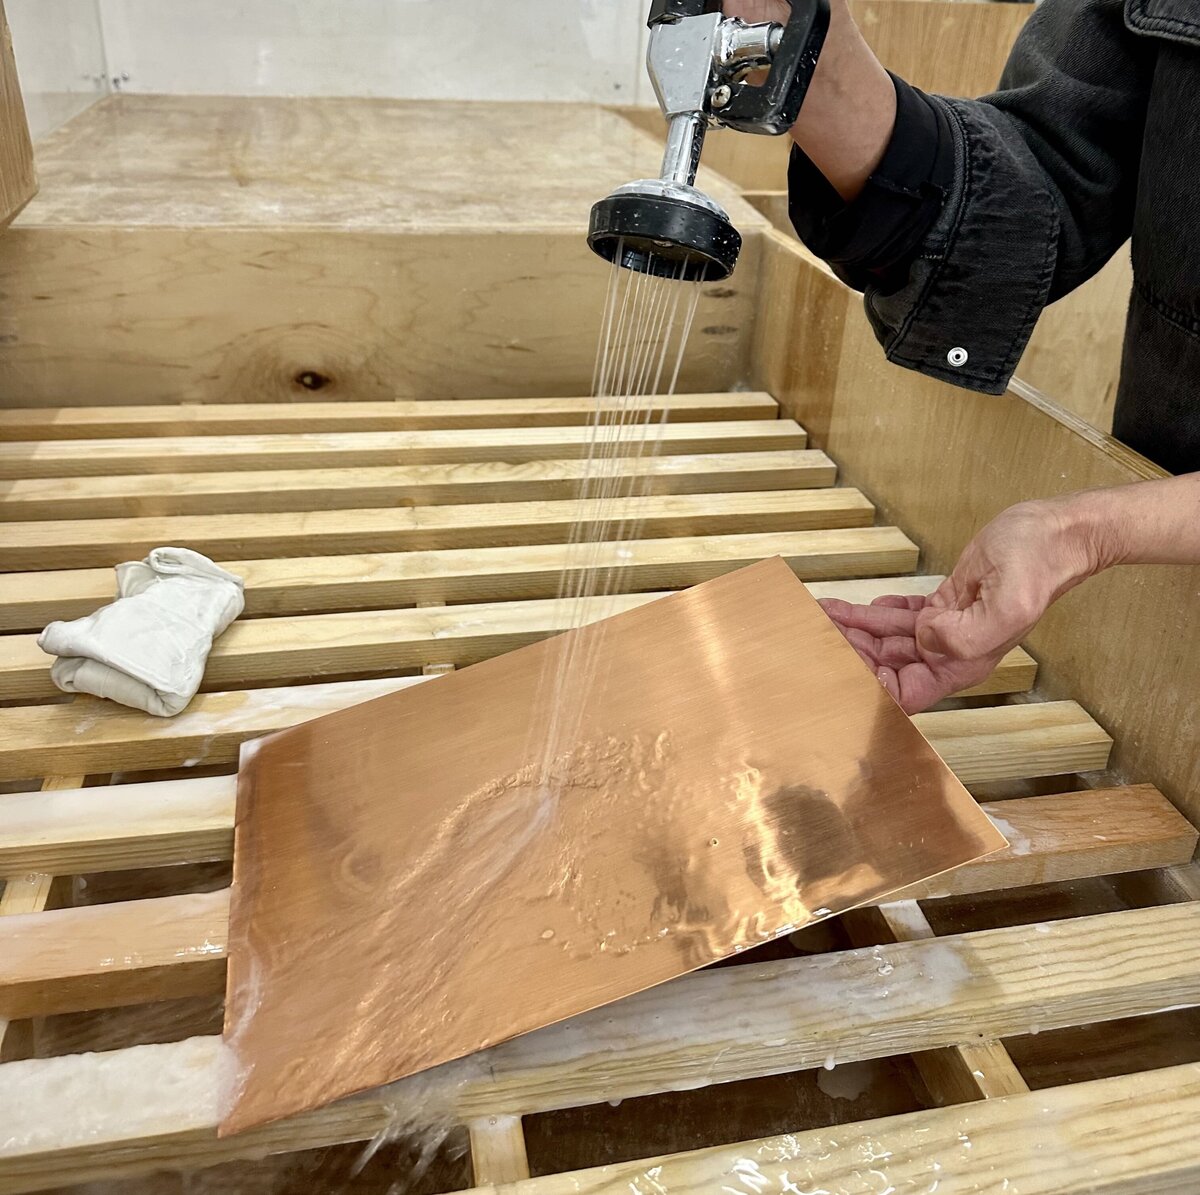 A printmaker rinsing a copper plate with water after etching, in preparation for printing in a printmaking studio.